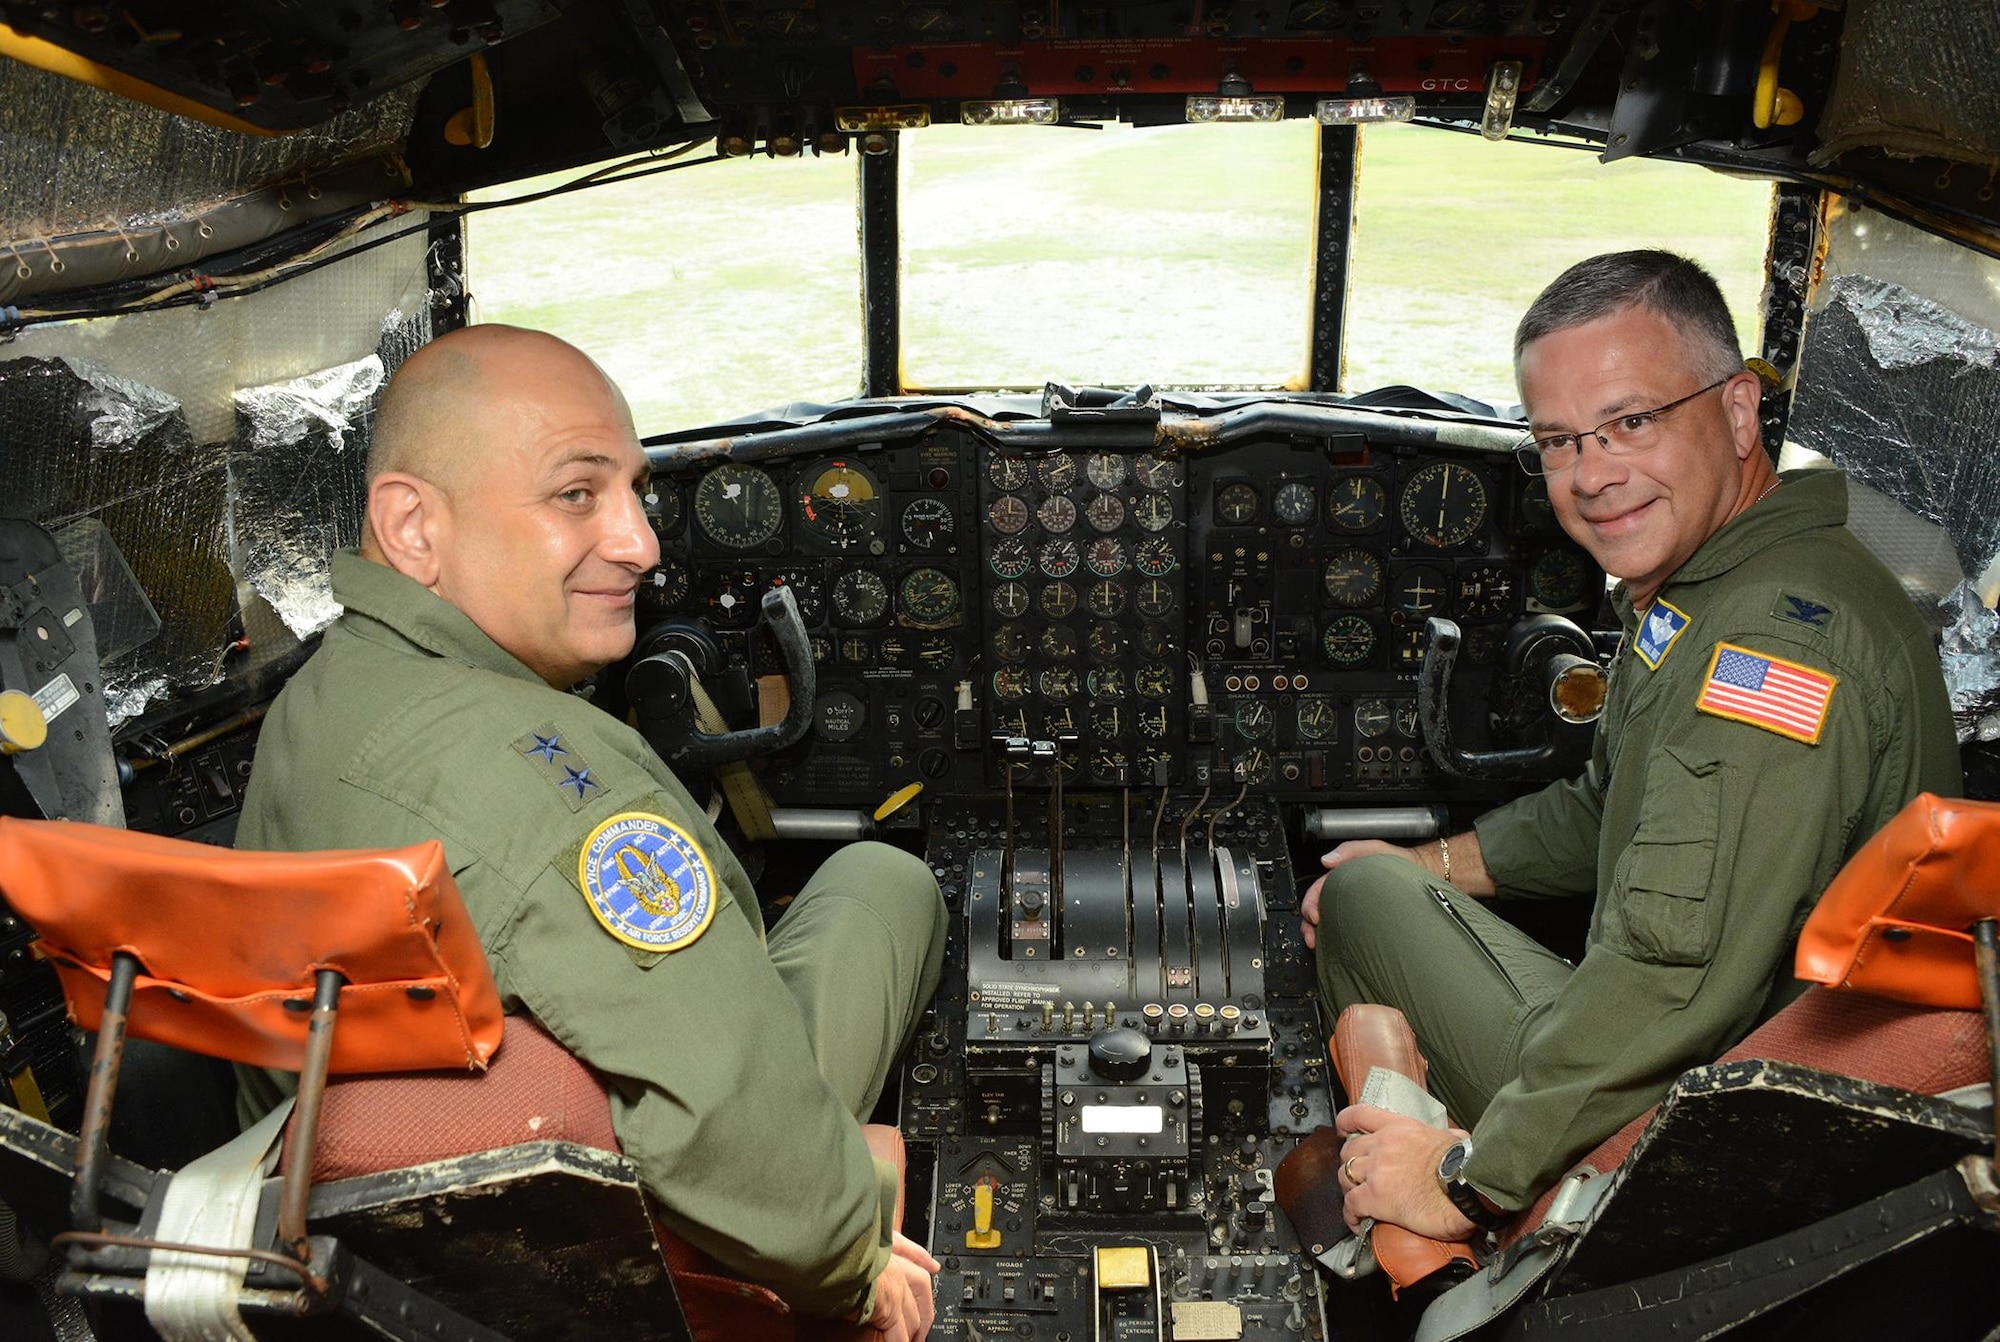 Maj. Gen. Richard S. “Beef” Haddad, left, and Col. Randal L. Bright get reacquainted with the cockpit of No. 55-0014, the AC-130A gunship they flew into combat in 1991. Haddad is vice commander of Air Force Reserve Command, while Bright serves as chief of the plans division in the Air Force Reserve Command Directorate of Plans and Programs at Robins Air Force Base, Ga. (U.S. Air Force photo/Master Sgt. Chance Babin)